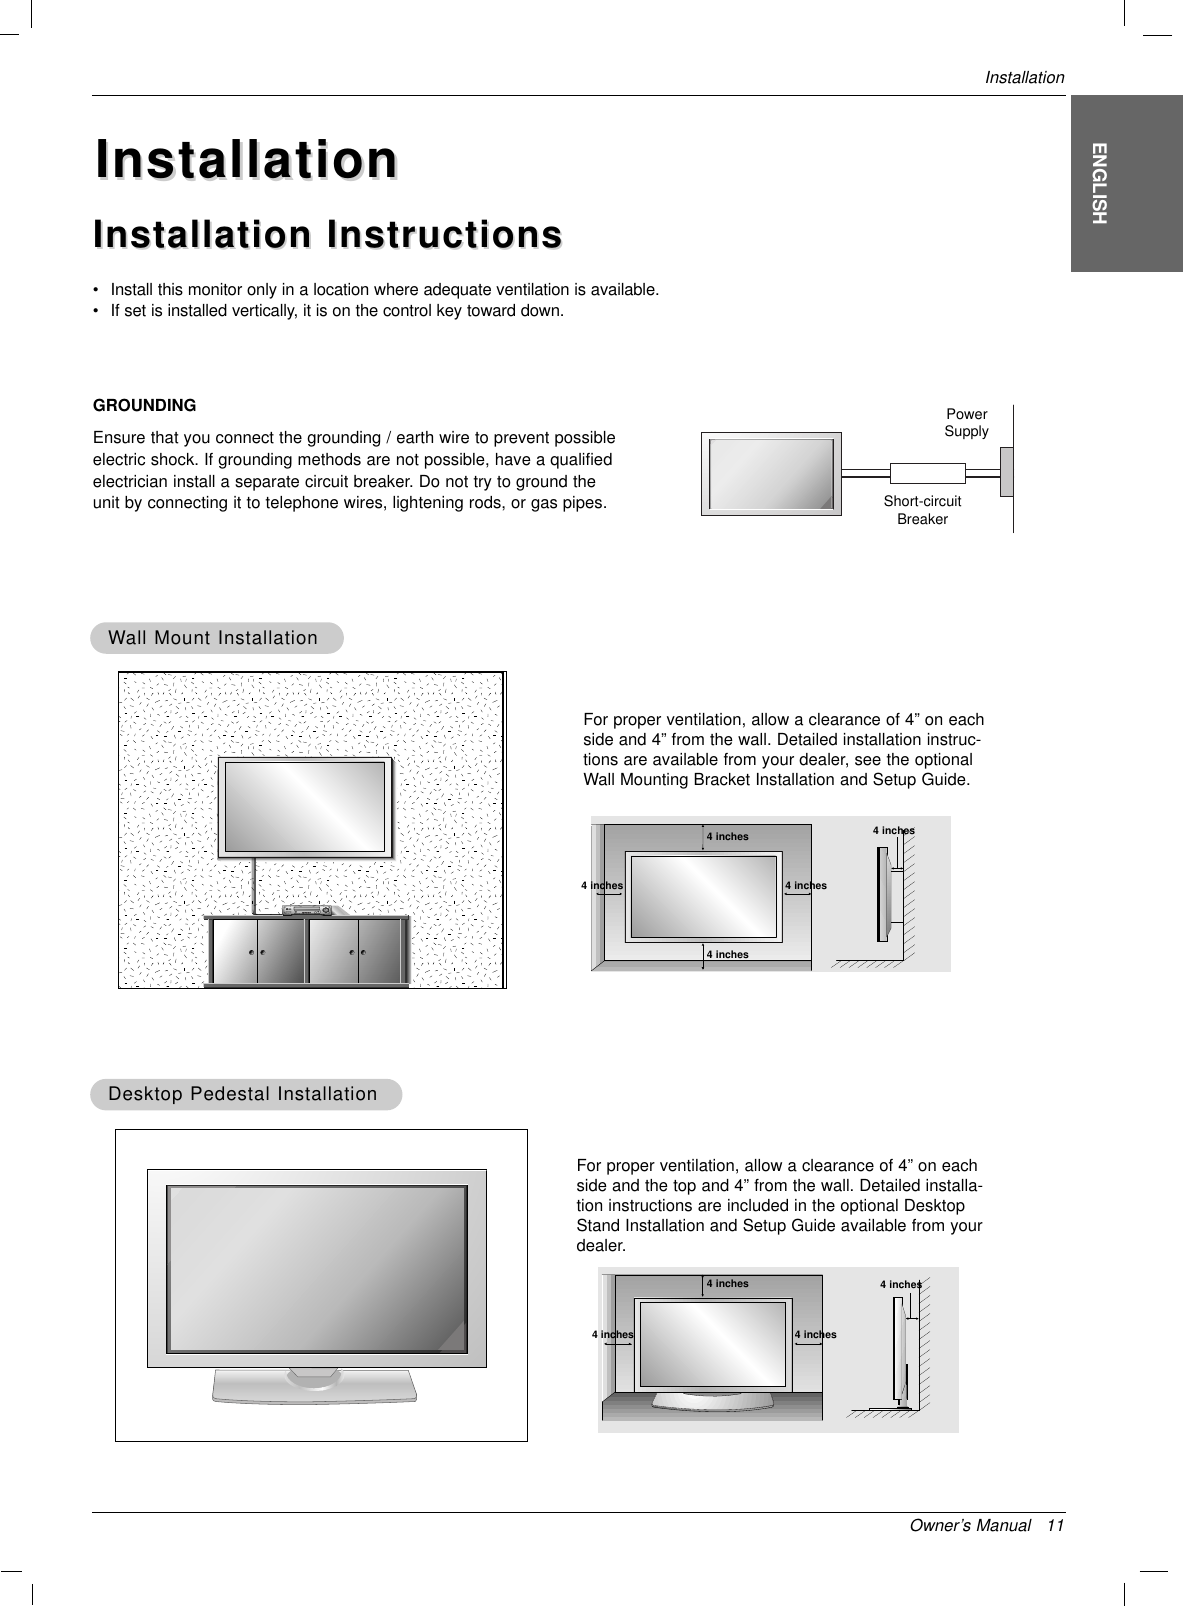 WWall Mount Installationall Mount InstallationFor proper ventilation, allow a clearance of 4” on eachside and 4” from the wall. Detailed installation instruc-tions are available from your dealer, see the optionalWall Mounting Bracket Installation and Setup Guide.•Install this monitor only in a location where adequate ventilation is available.• If set is installed vertically, it is on the control key toward down.GROUNDINGEnsure that you connect the grounding / earth wire to prevent possibleelectric shock. If grounding methods are not possible, have a qualifiedelectrician install a separate circuit breaker. Do not try to ground theunit by connecting it to telephone wires, lightening rods, or gas pipes.PowerSupplyShort-circuitBreakerDesktop Pedestal InstallationDesktop Pedestal InstallationFor proper ventilation, allow a clearance of 4” on eachside and the top and 4” from the wall. Detailed installa-tion instructions are included in the optional DesktopStand Installation and Setup Guide available from yourdealer.InstallationInstallationInstallation InstructionsInstallation InstructionsOwner’s Manual   11InstallationENGLISH4 inches4 inches4 inches4 inches4 inches4 inches4 inches4 inches4 inches